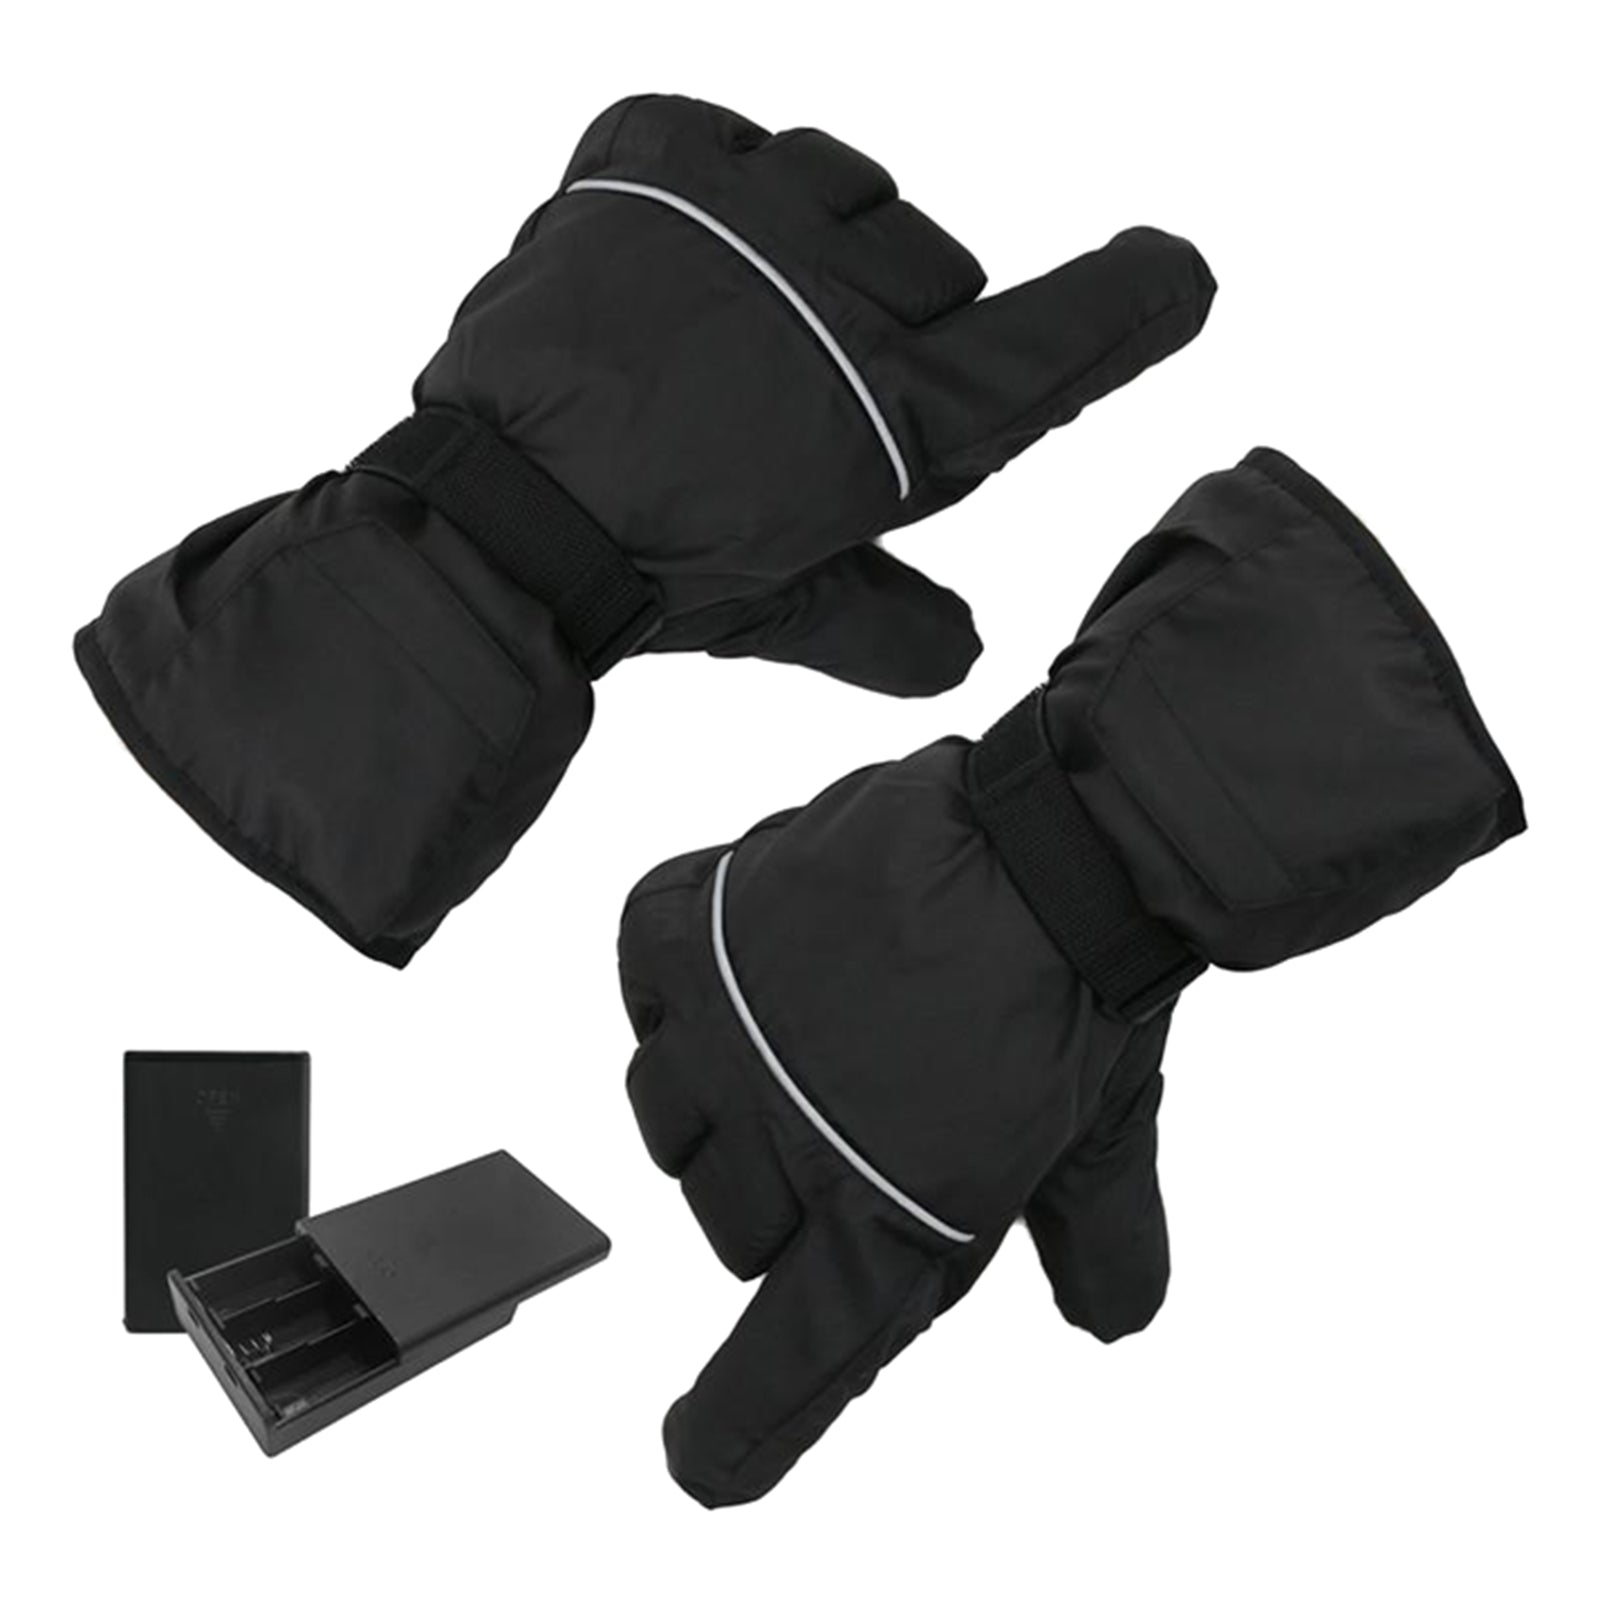 Winter Electric Heated Glove Rechargeable Battery Warm Hand Sport Black+Gray